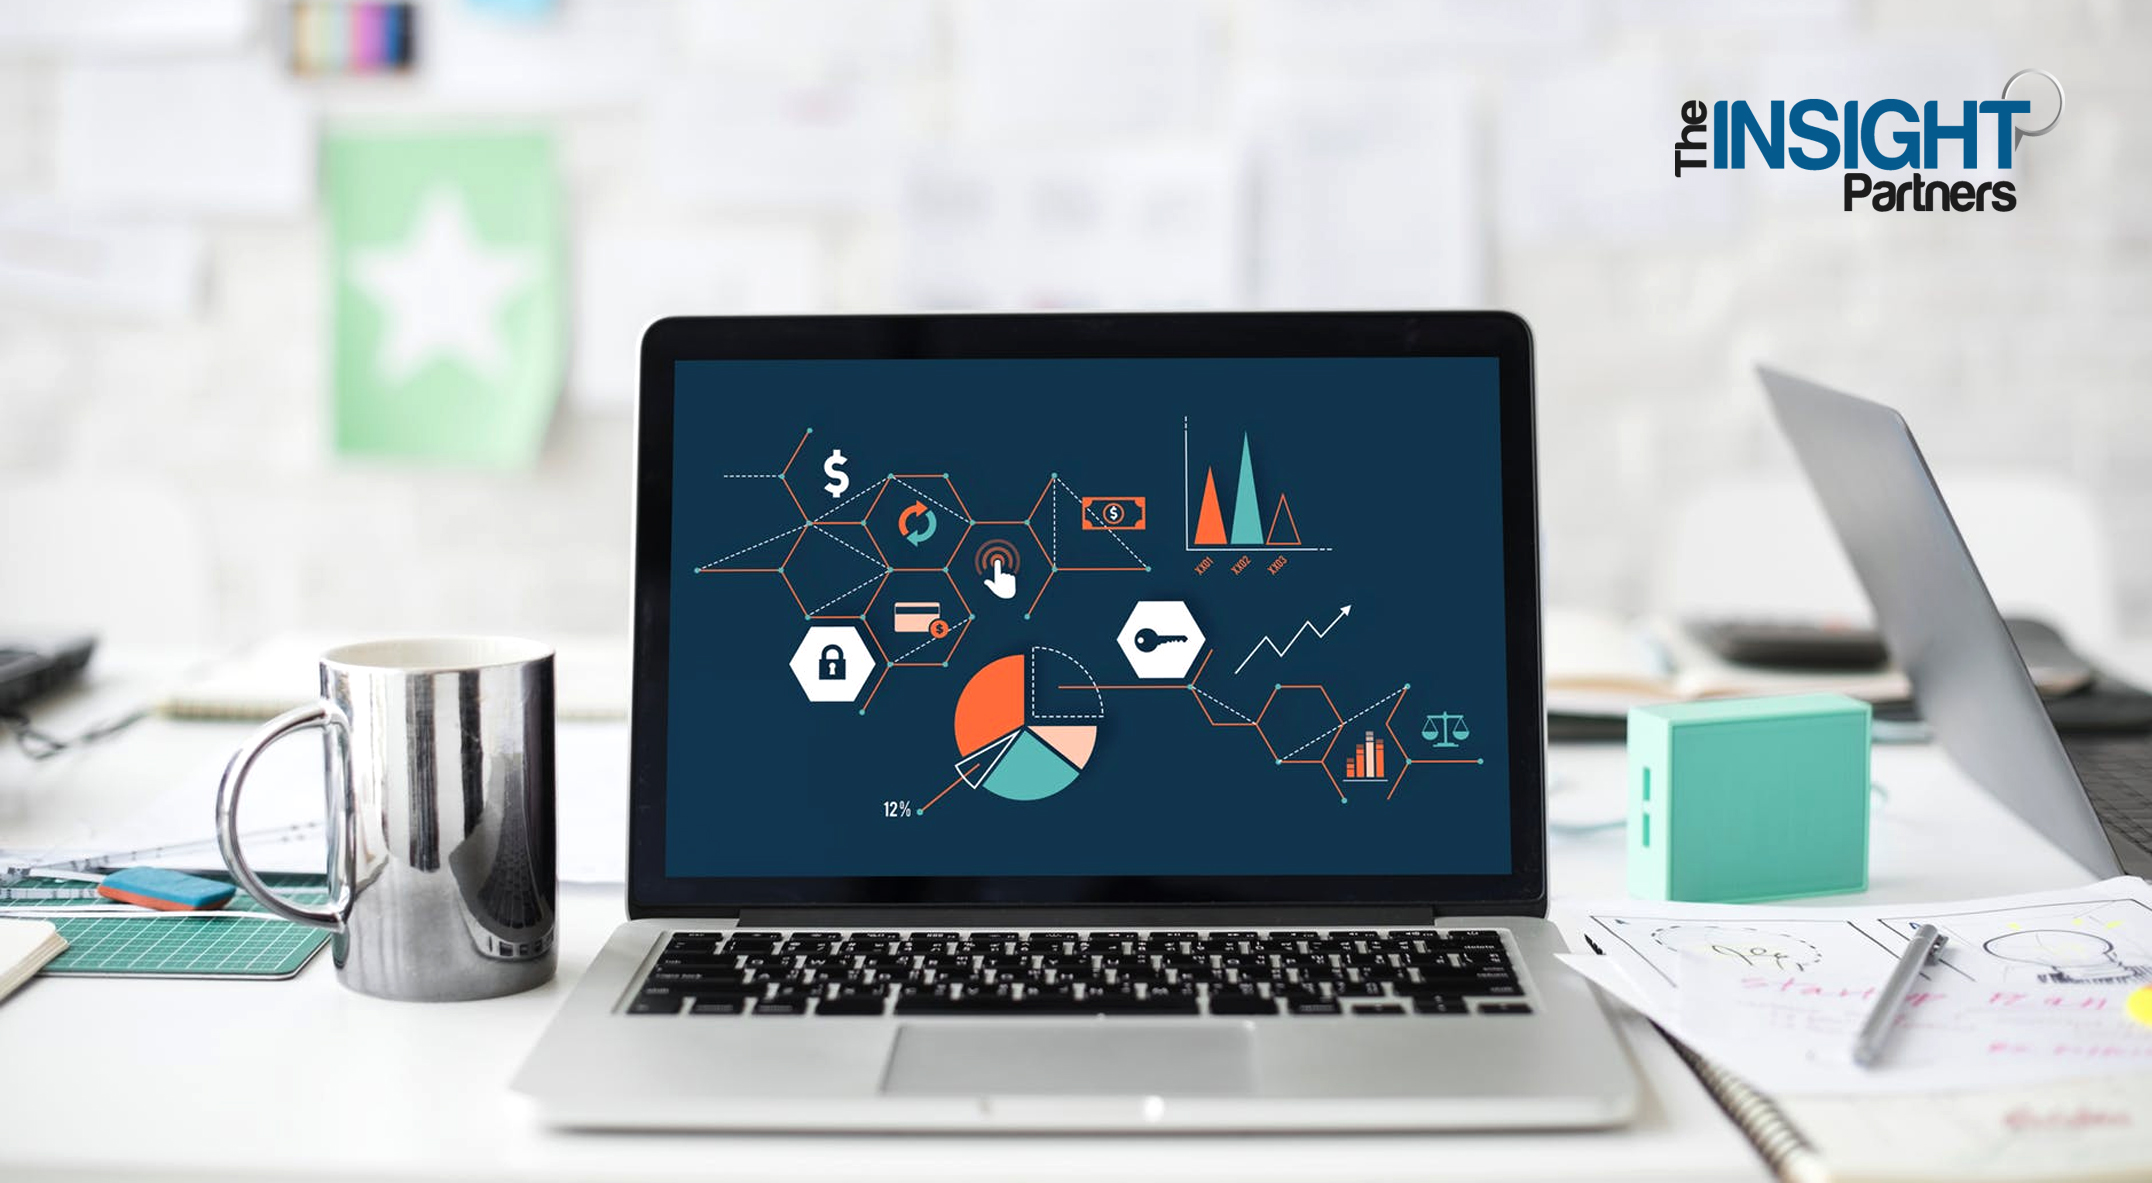 Fault Detection & Monitoring Based Analytics Market – Global Industry Analysis, Size, Share, Trends and Forecast 2019 – 2027